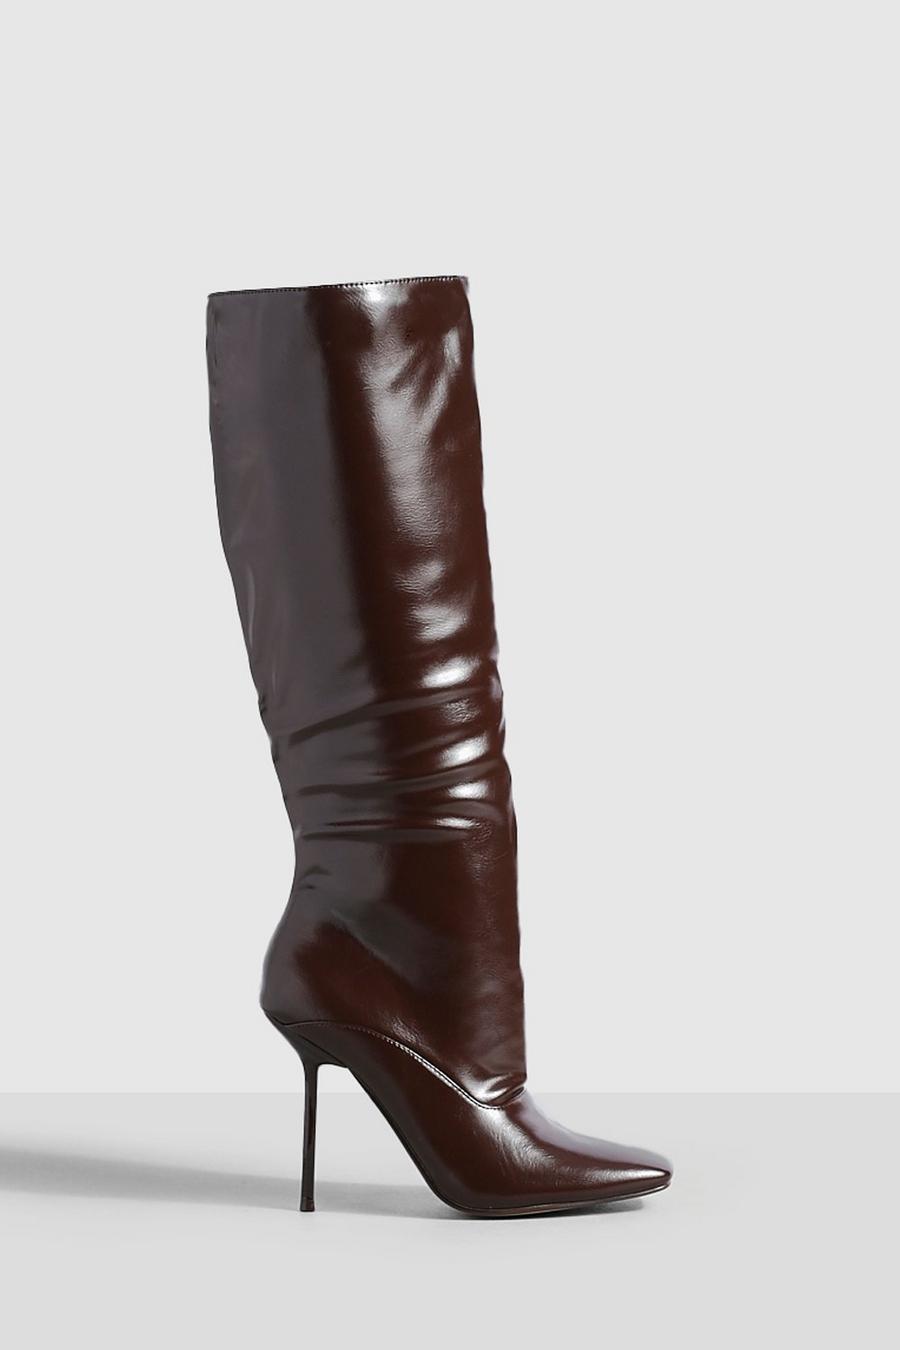 Chocolate Square Toe Stilleto Knee High Boots